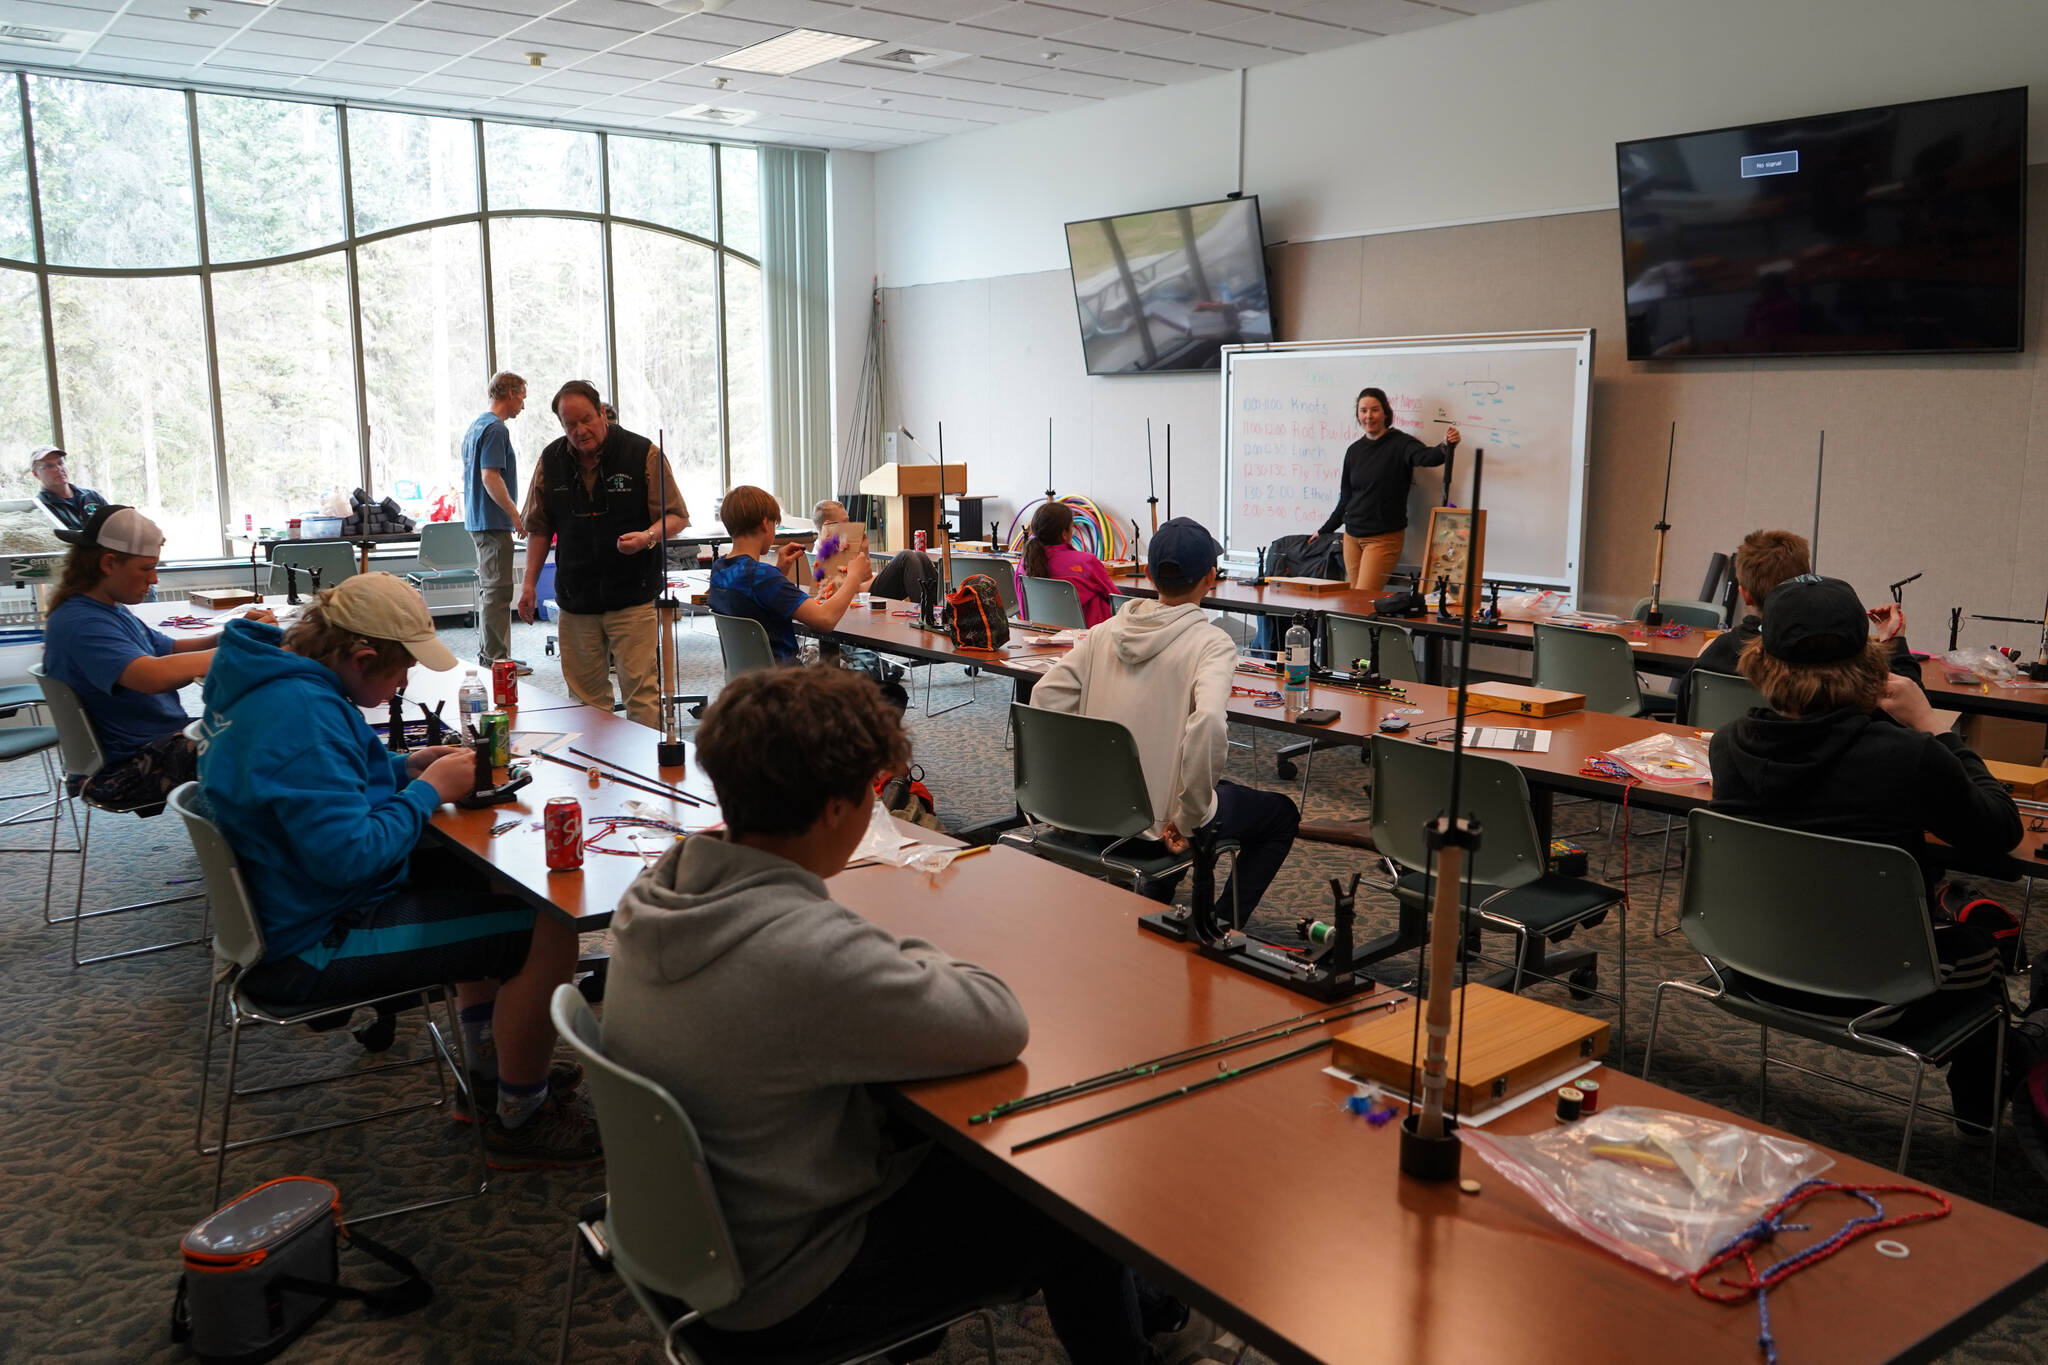 Middle schoolers participate in a discussion of ethical angling practices during a kids camp put on by Trout Unlimited at the Donald E. Gilman Kenai River Center in Soldotna, Alaska, on Wednesday, May 24, 2023. (Jake Dye/Peninsula Clarion)